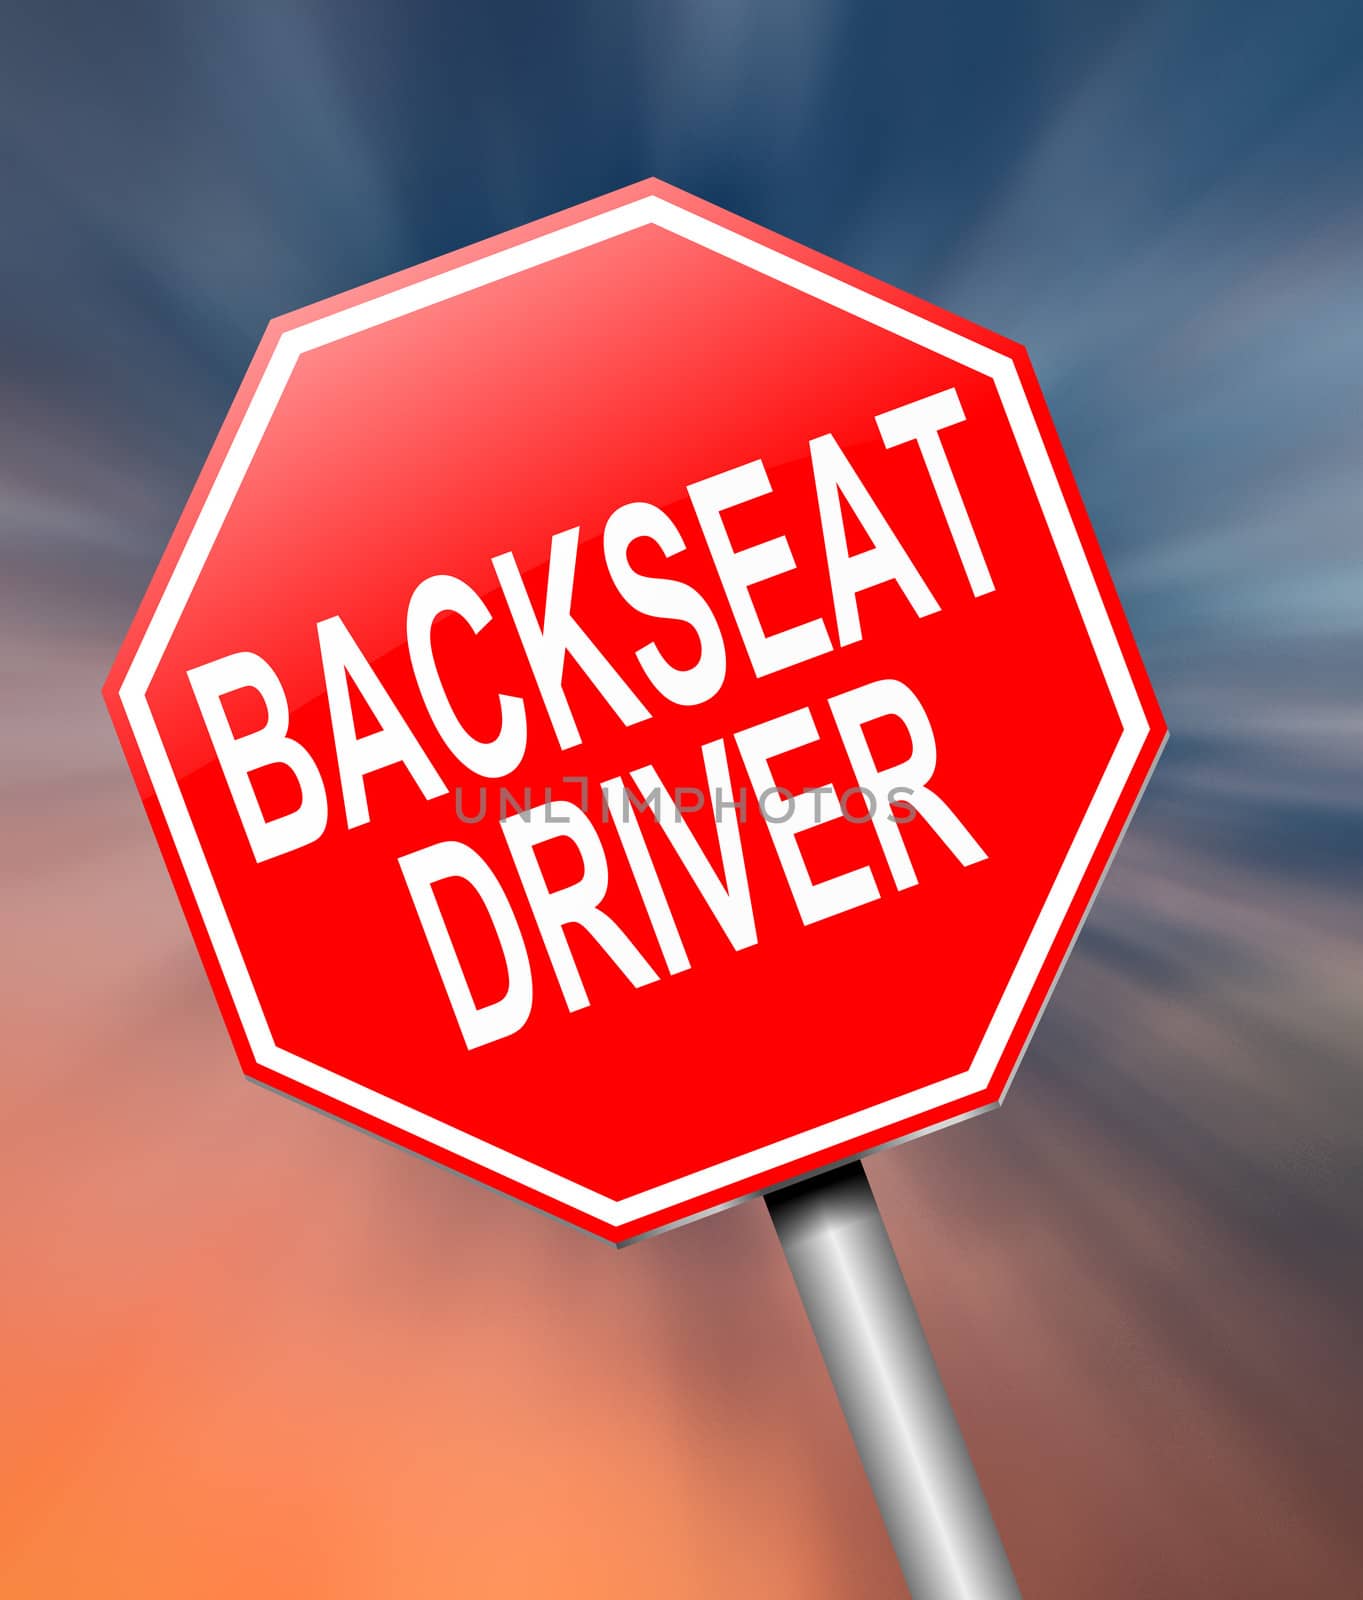 Illustration depicting a sign with a backseat driver concept.